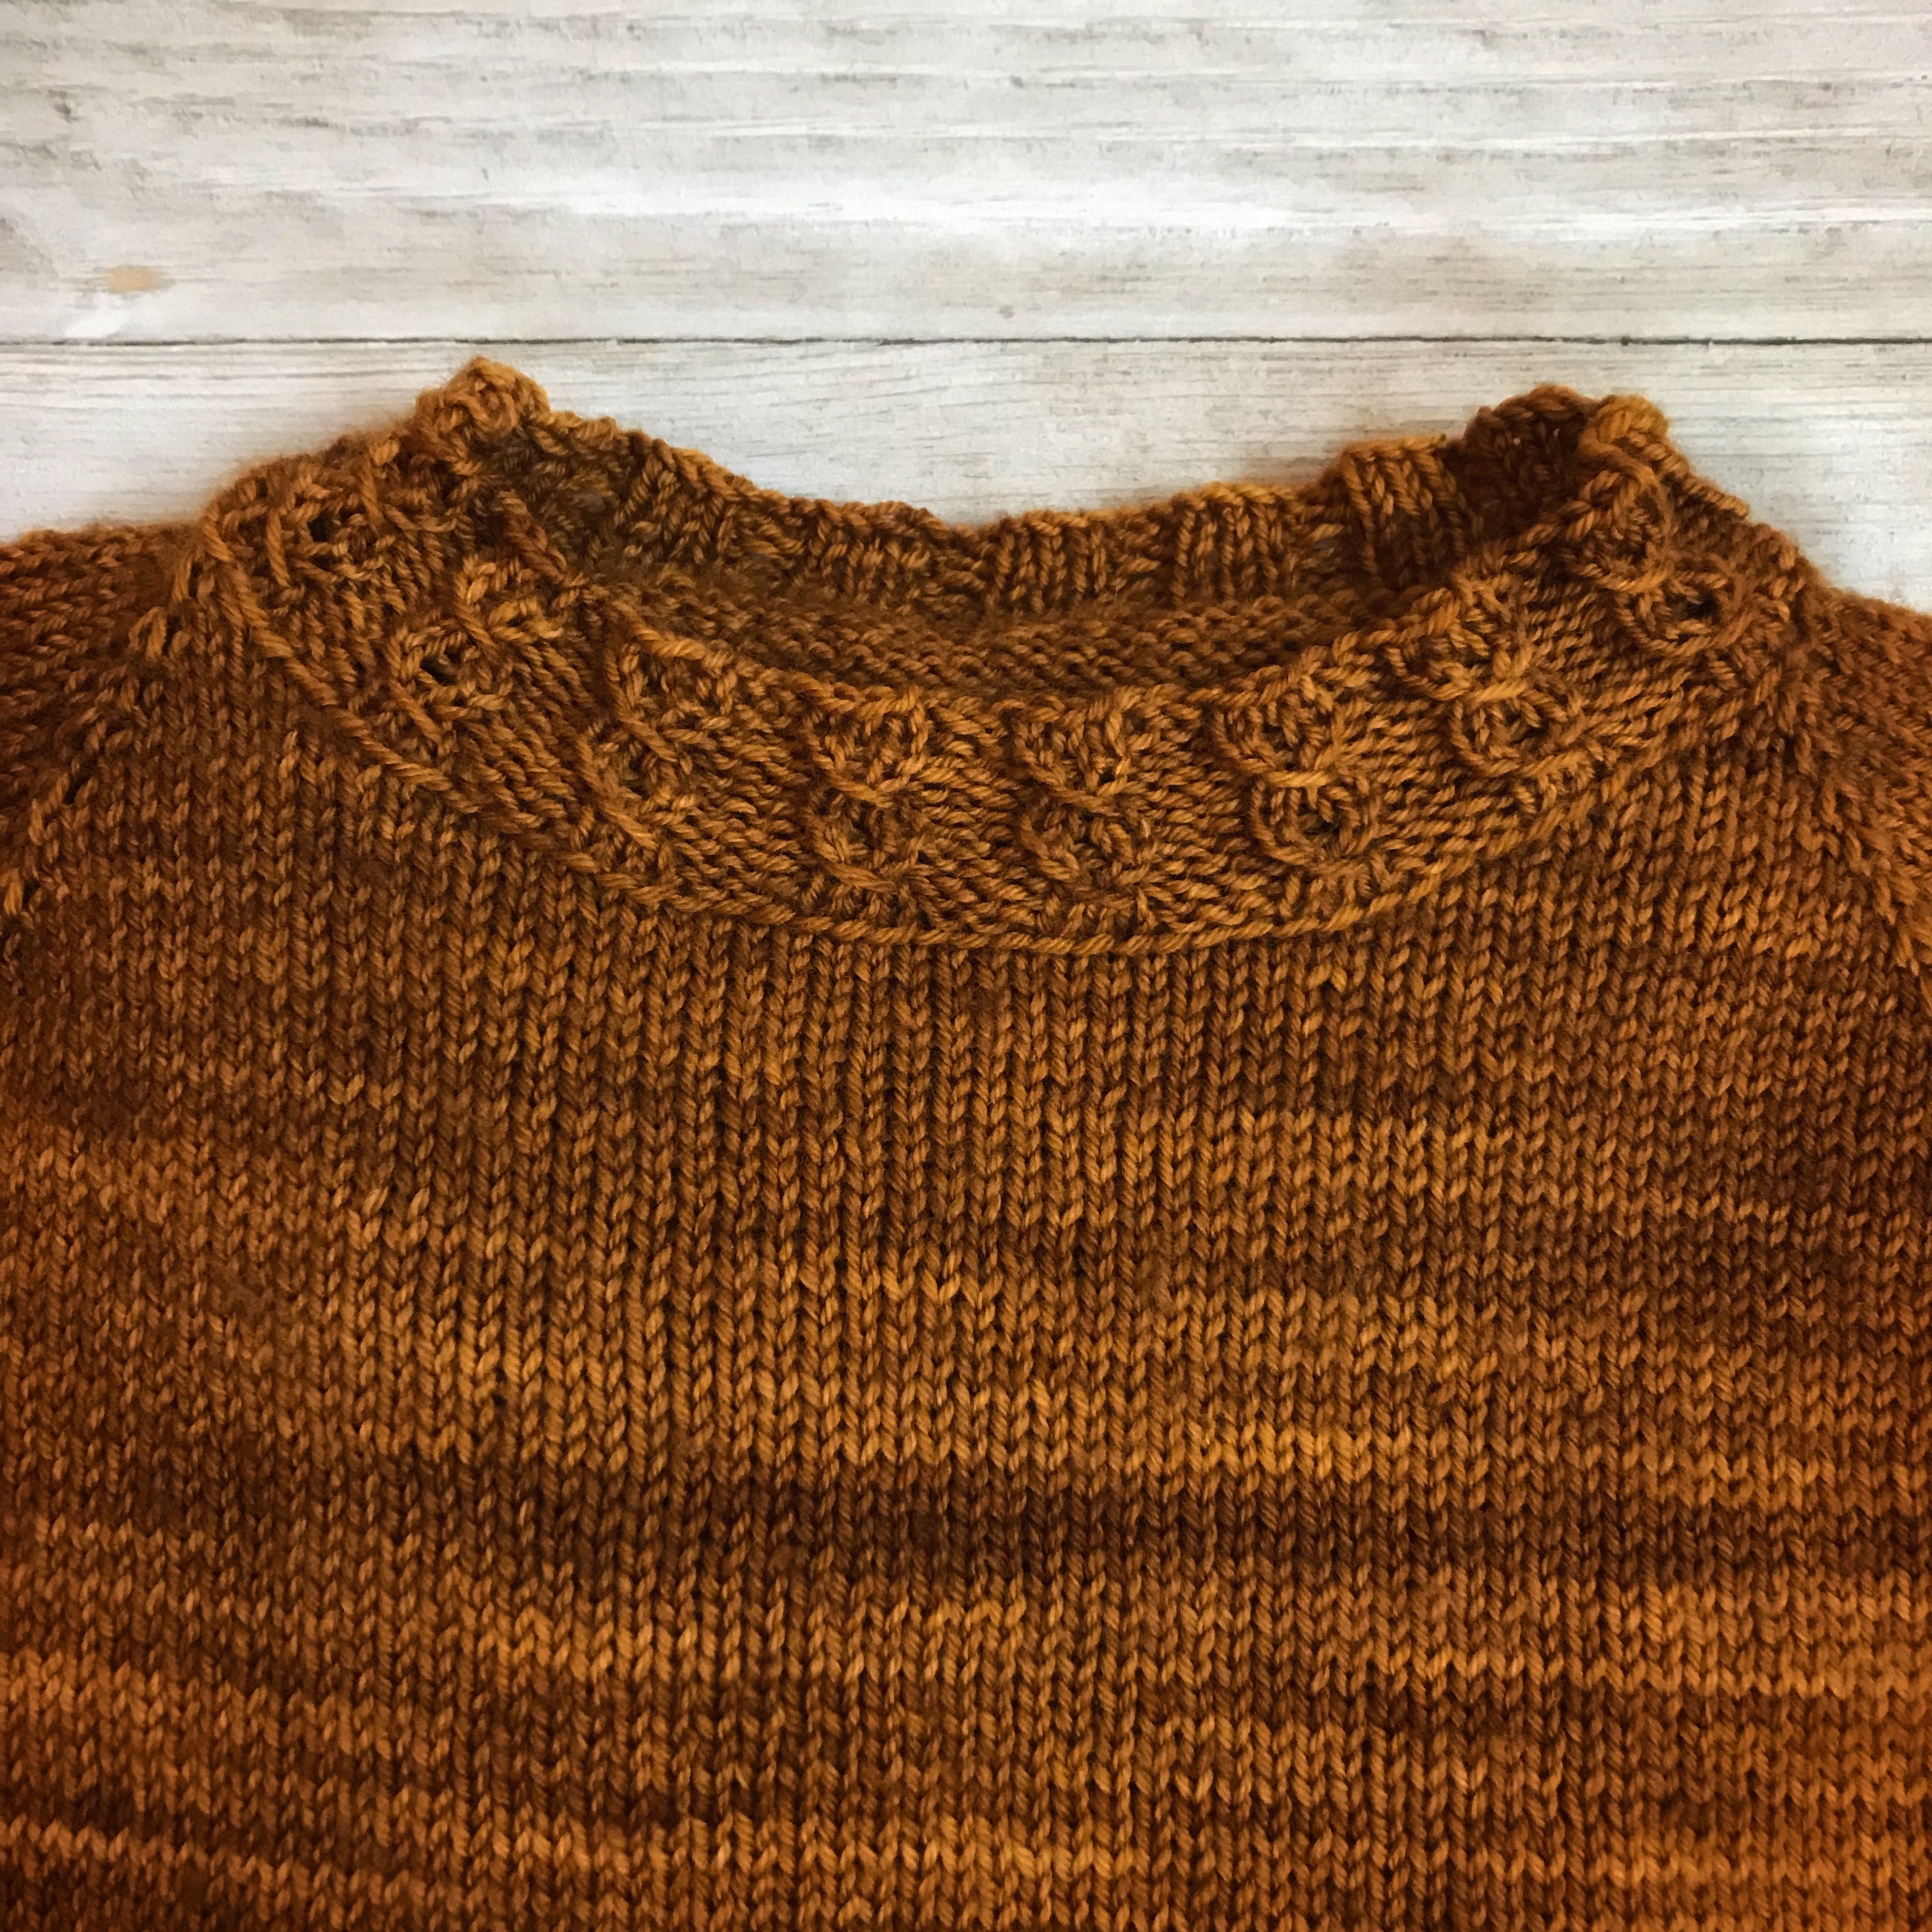 How to knit a simple neckline — The Craft Sessions